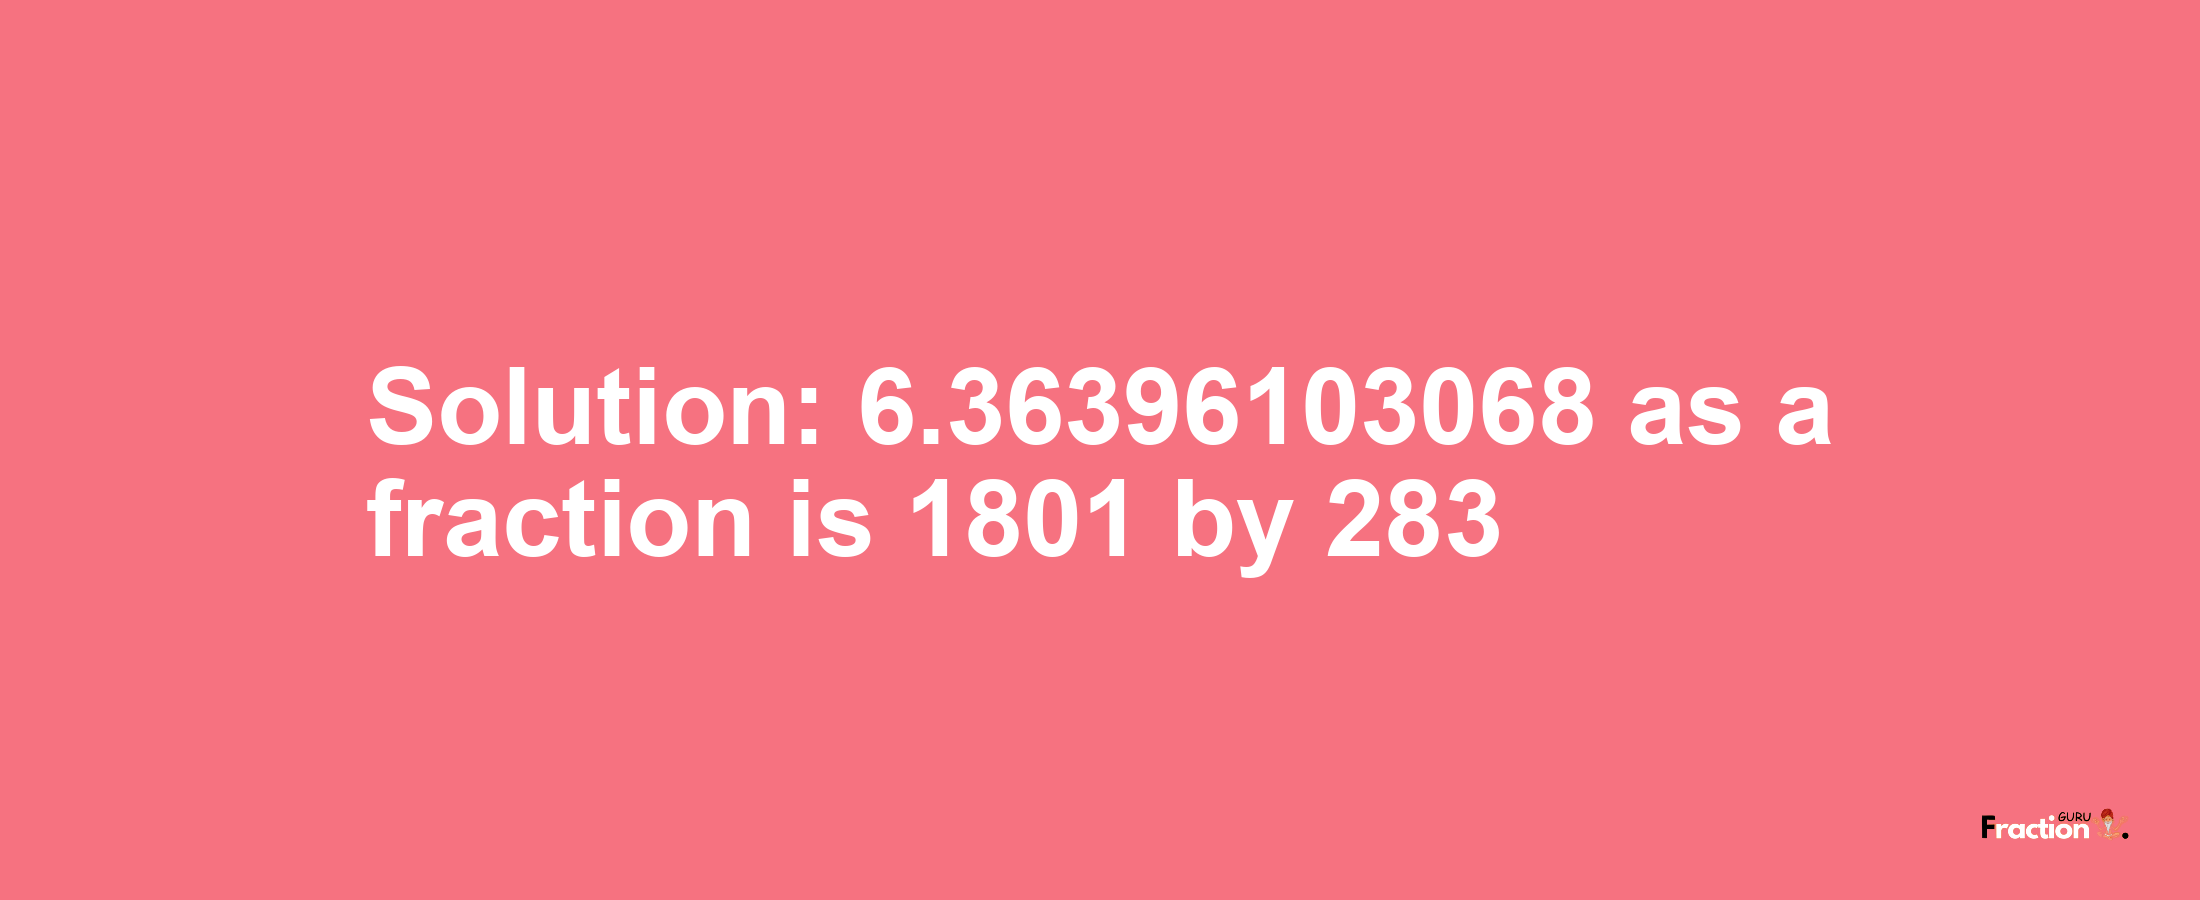 Solution:6.36396103068 as a fraction is 1801/283